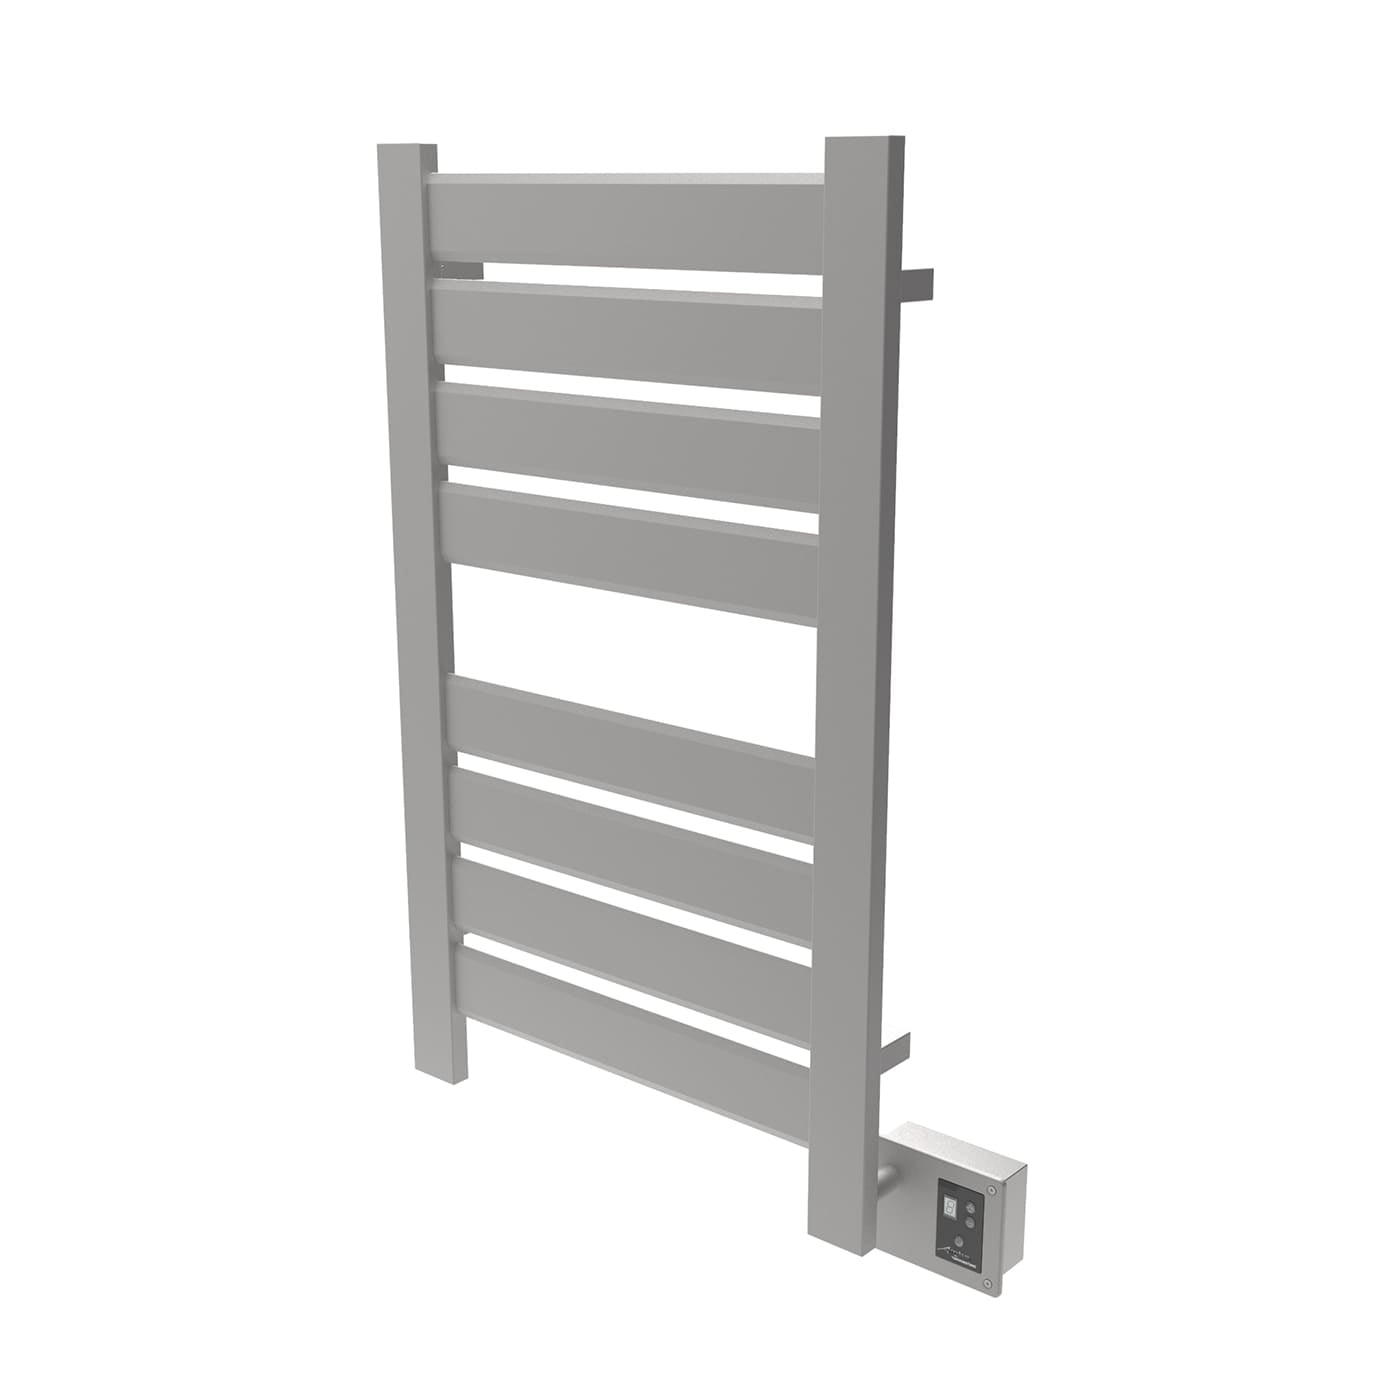 Picture of Amba V2338B 57.75 x 26.25 x 3.63 in. Towel Rack - Brushed